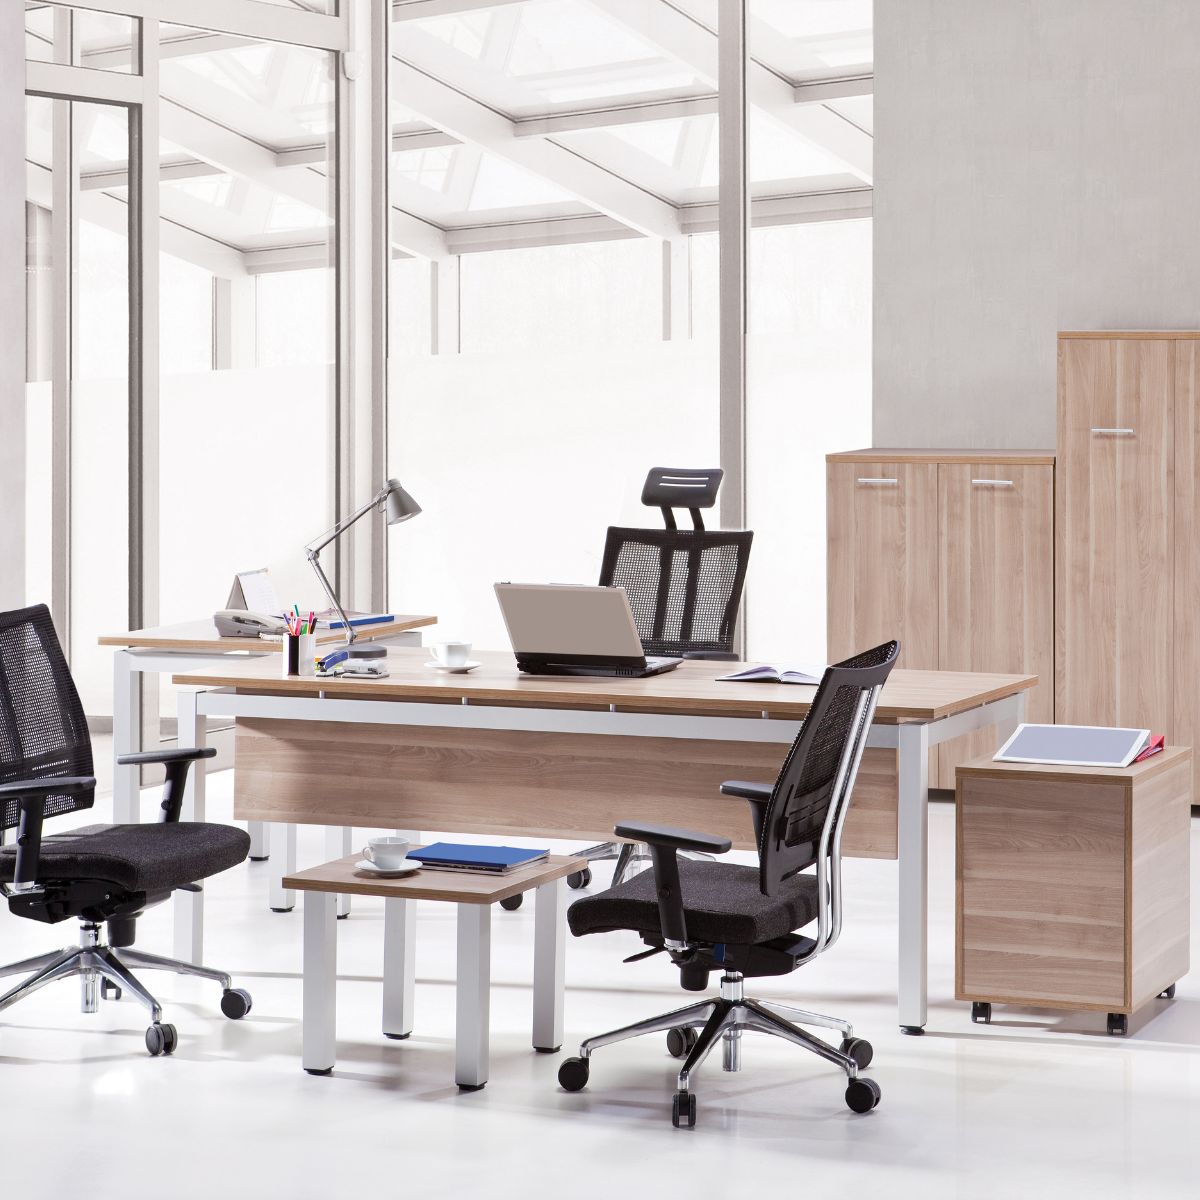 Read more about the article Ideas for setting up your desk to keep it clean and organized